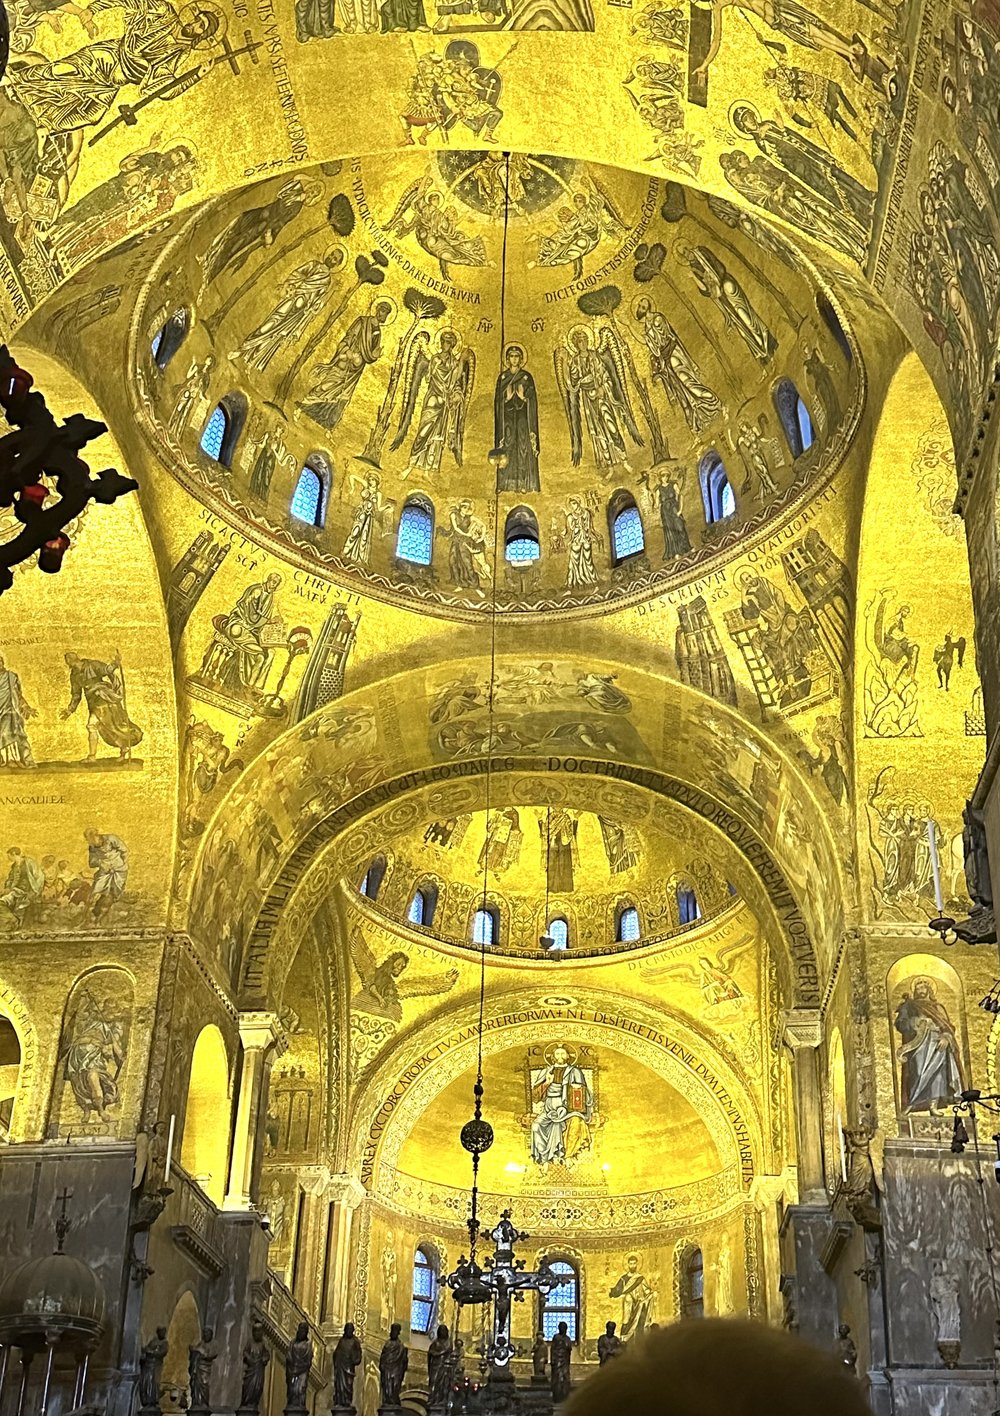 The amazing gold ceiling